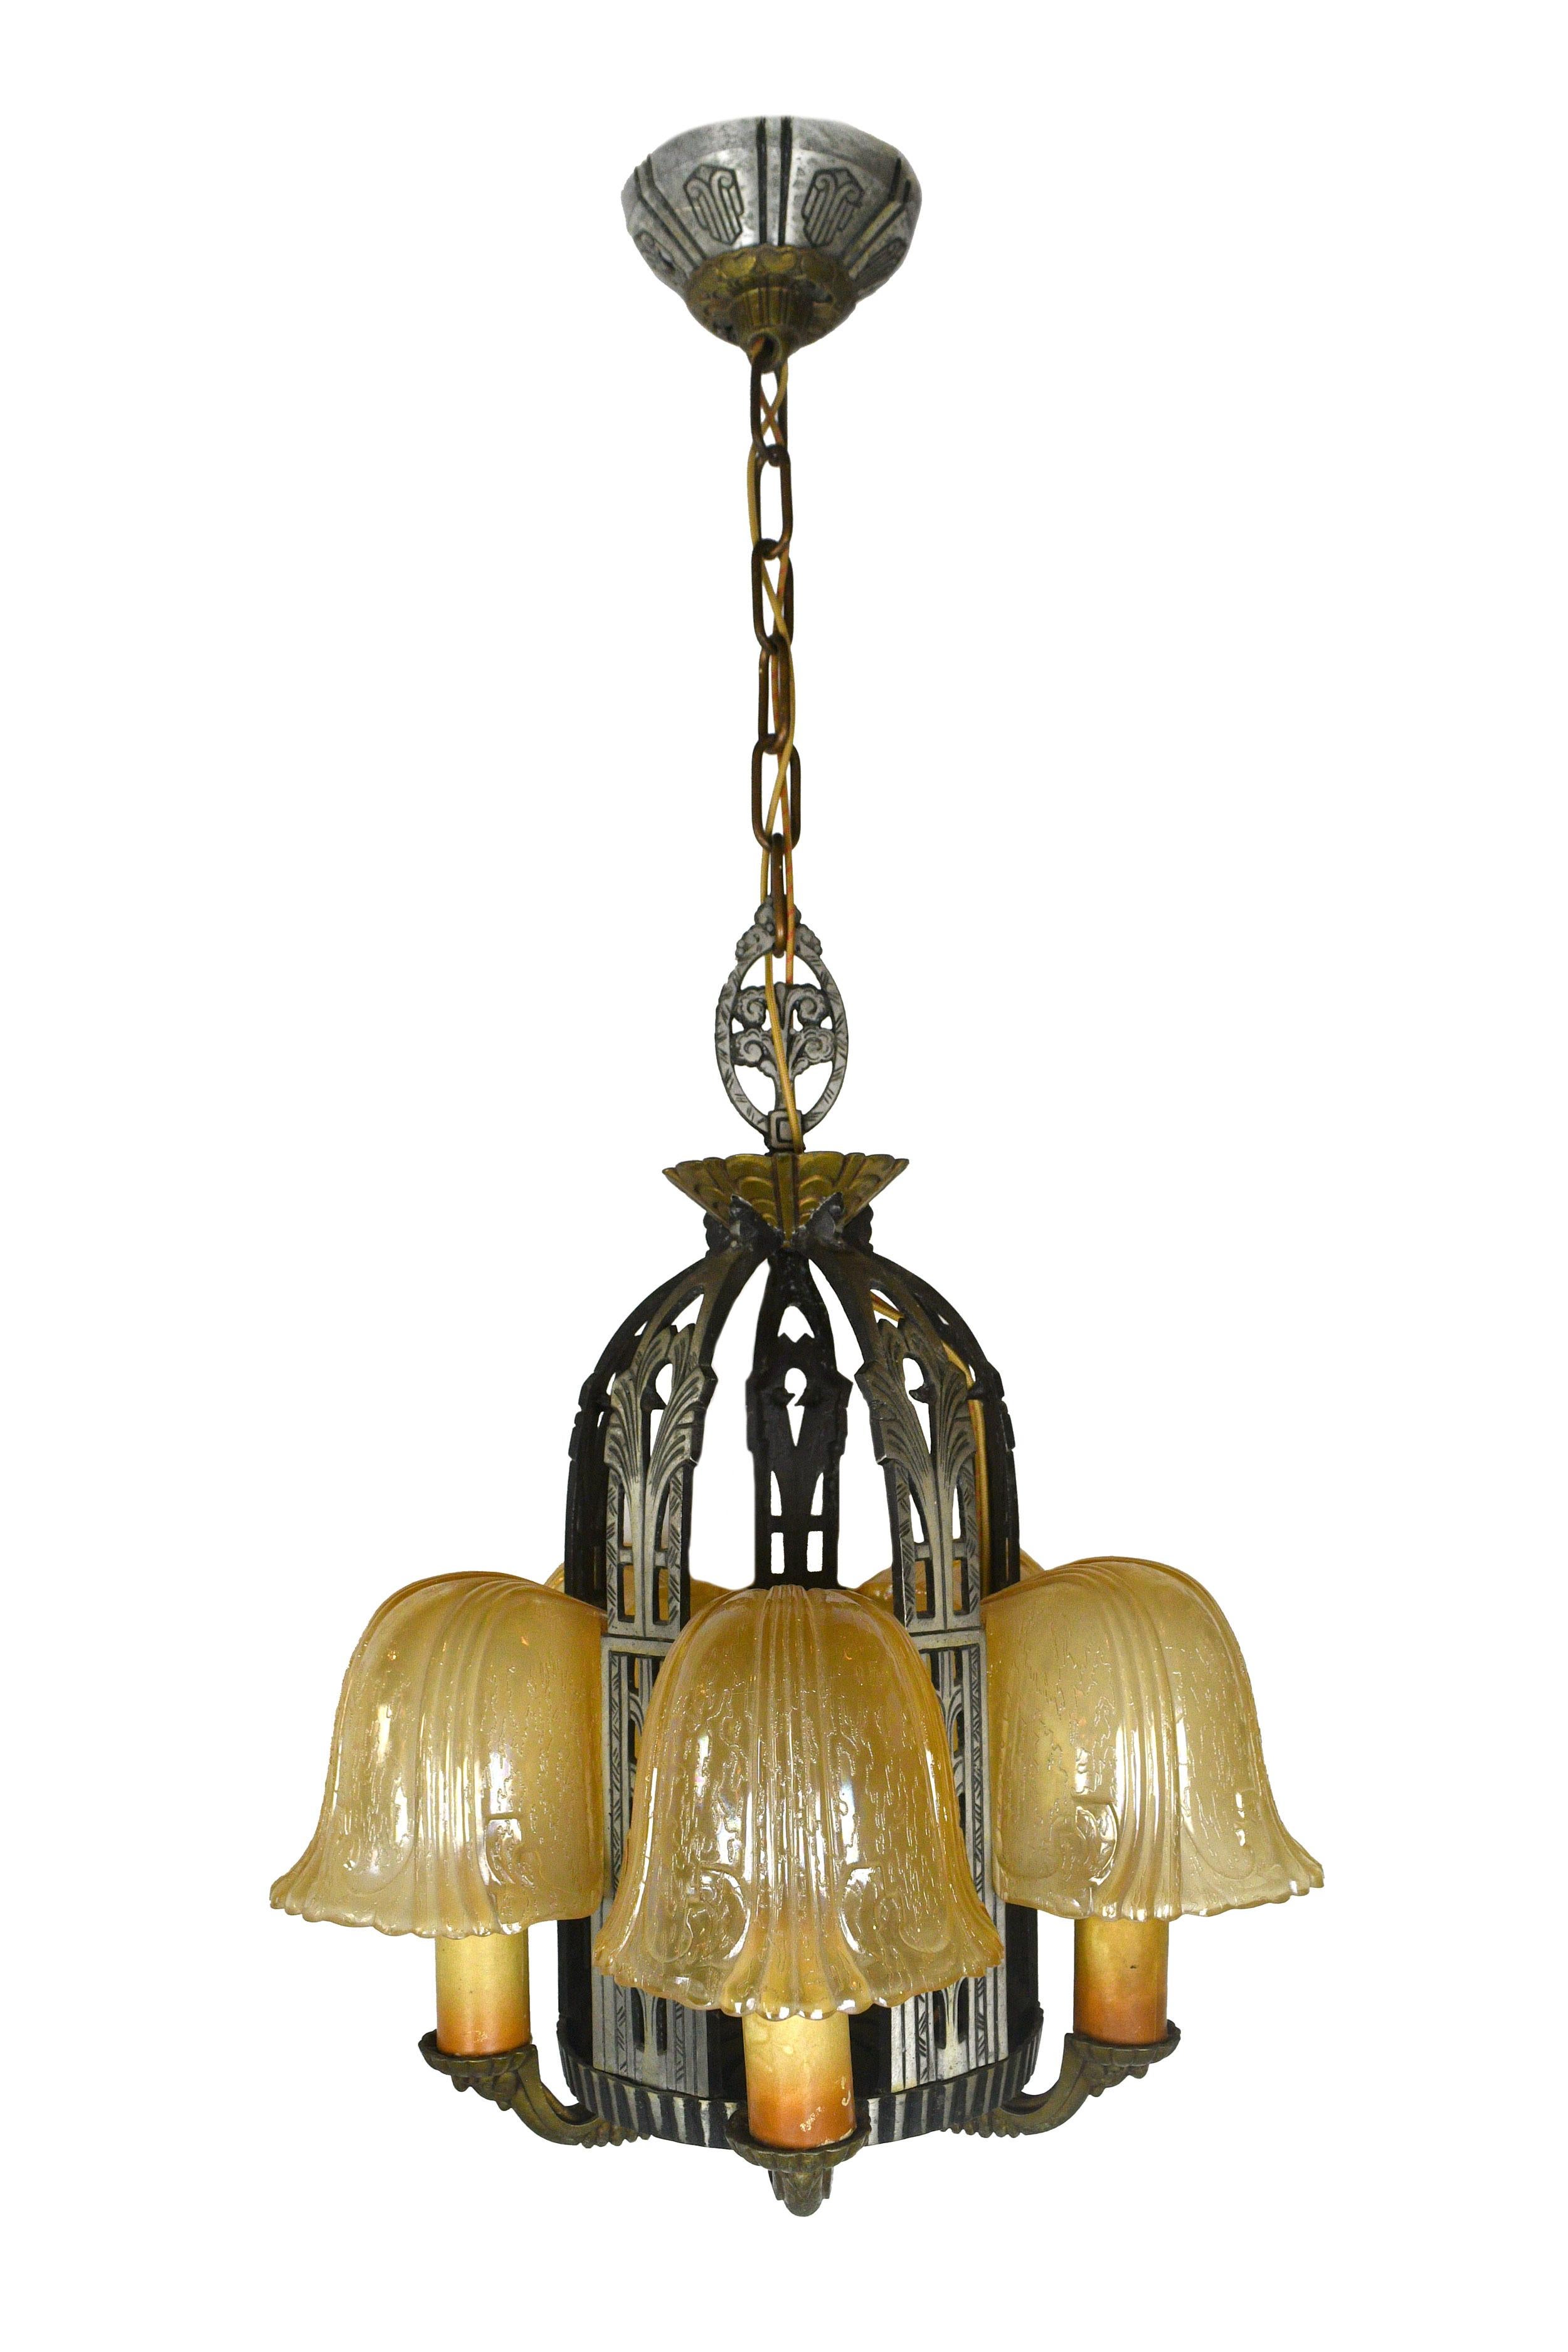 Riddle Art Deco 5 Candle Slip Shade Chandelier In Good Condition For Sale In Minneapolis, MN